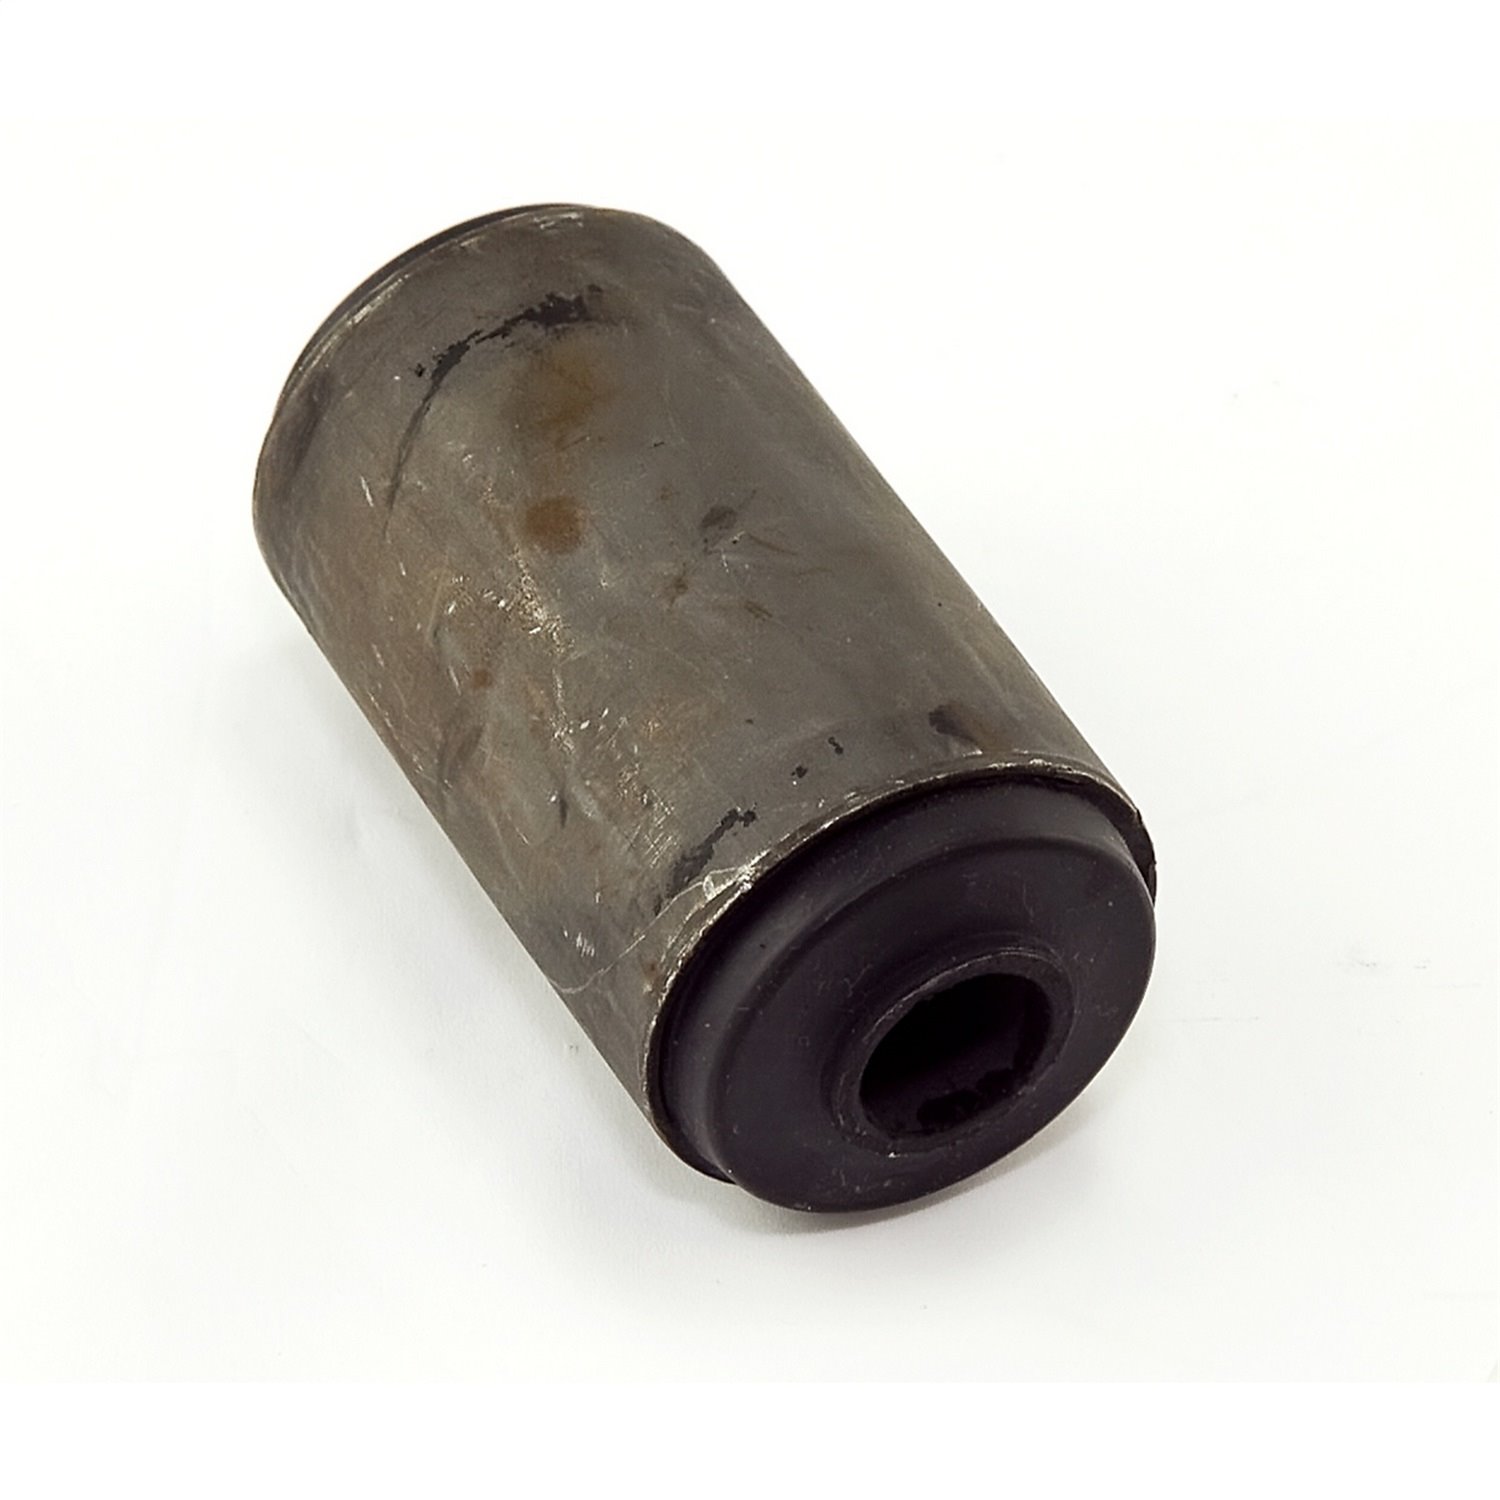 Replacement leaf spring bushing from Omix-ADA, Fits 84-91 Jeep SJ Grand Wagoneers., Fits front or